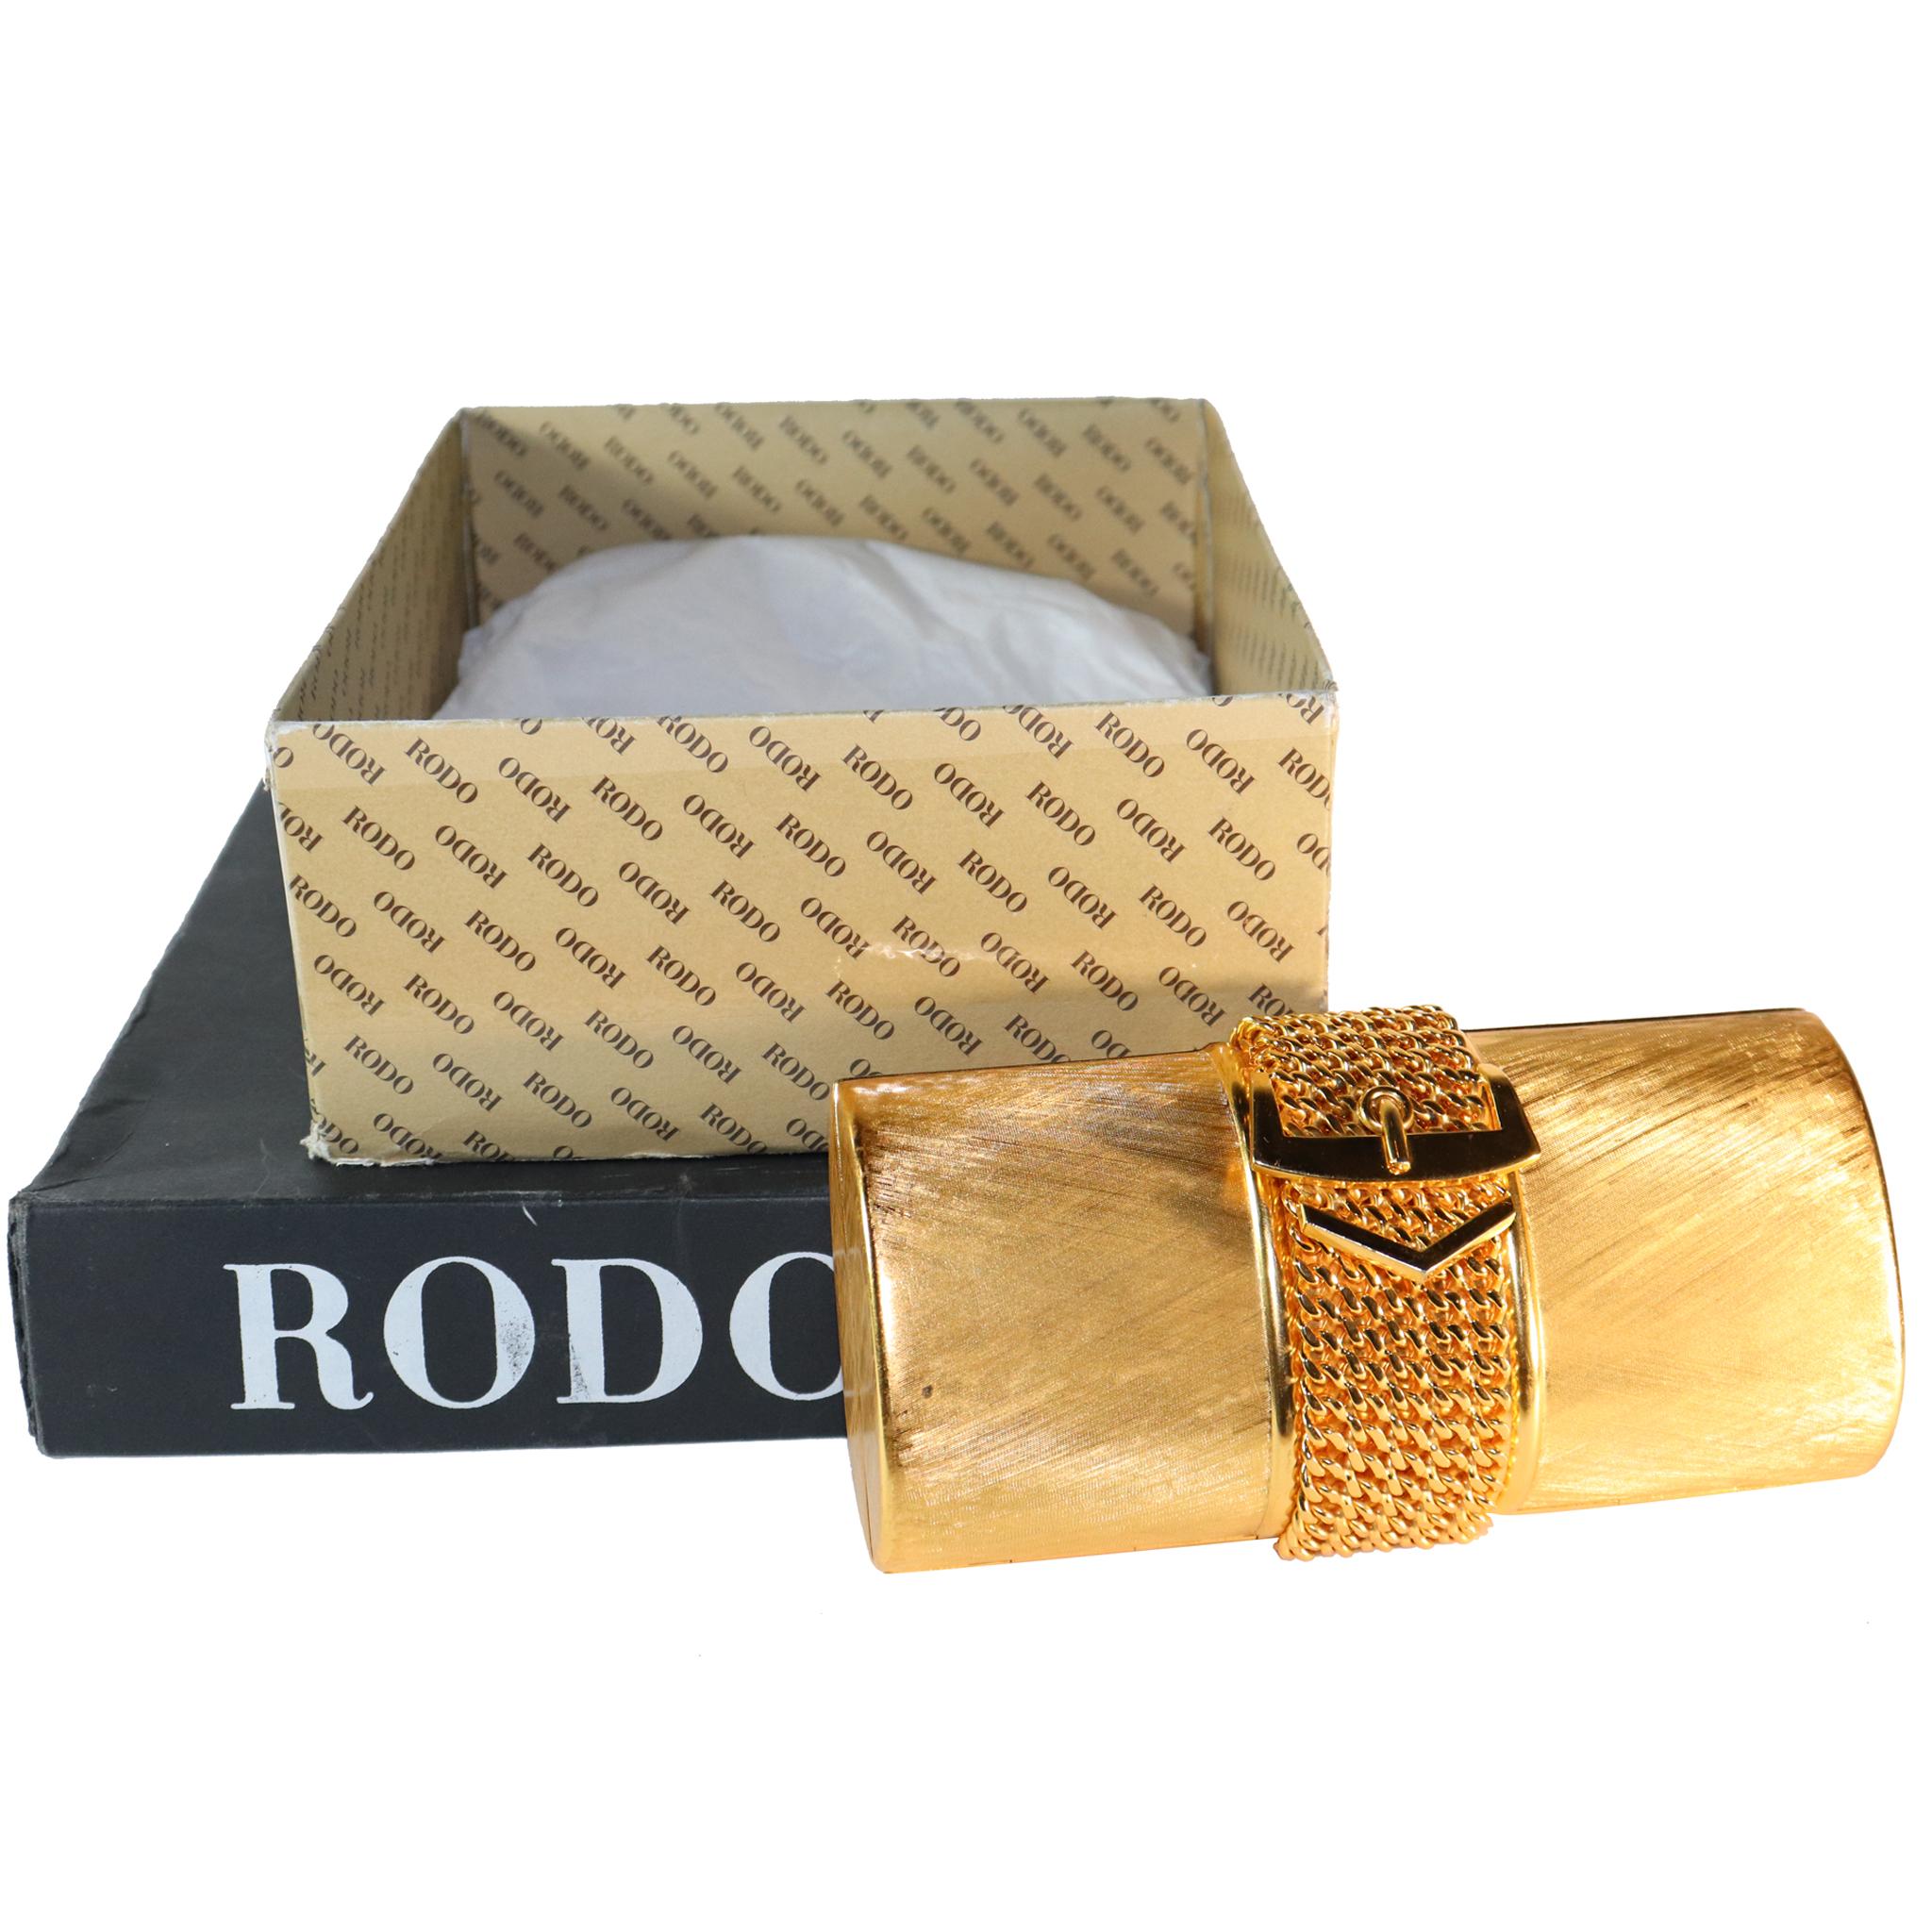 Rodo Golden Minaudière Handbag with Buckle Strap.In excellent condition, 

Measurements: 
Height - 4.2 Inches 
Width - 7.1 Inches 